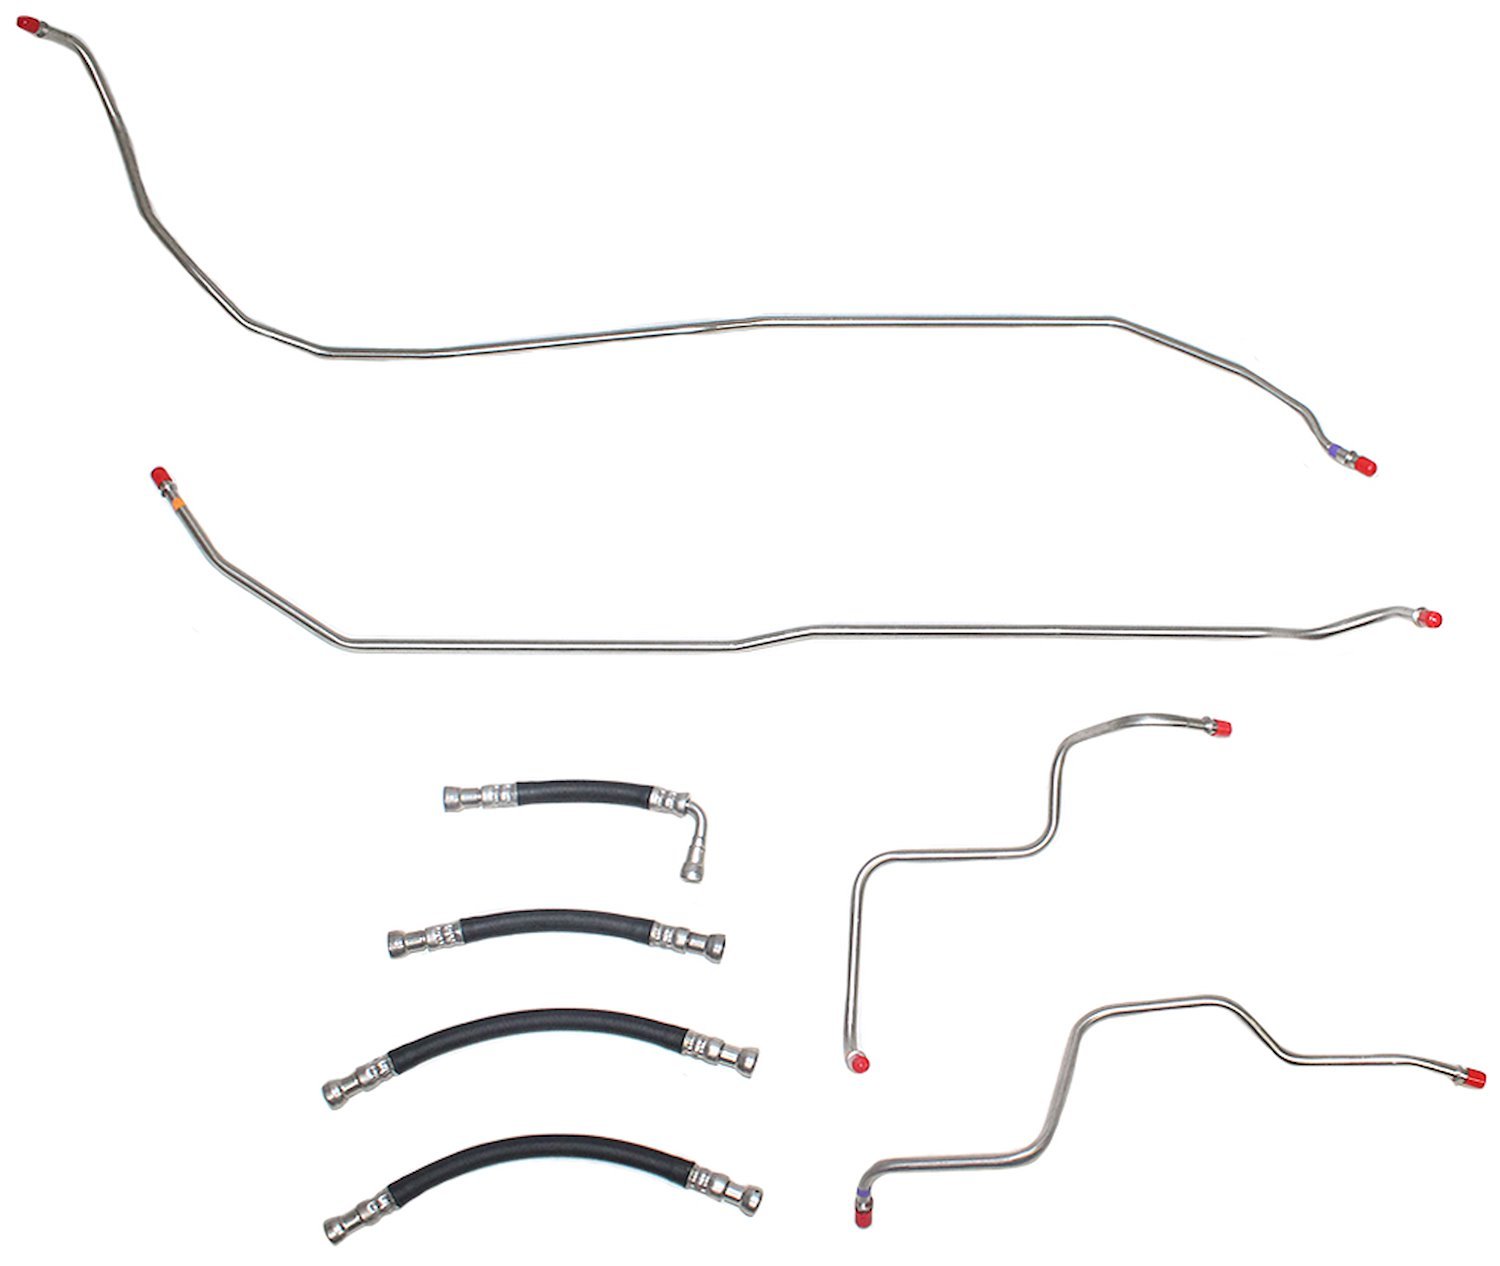 Complete Fuel Line Kit for 2004-2007 H2 Hummer [Stainless Steel]